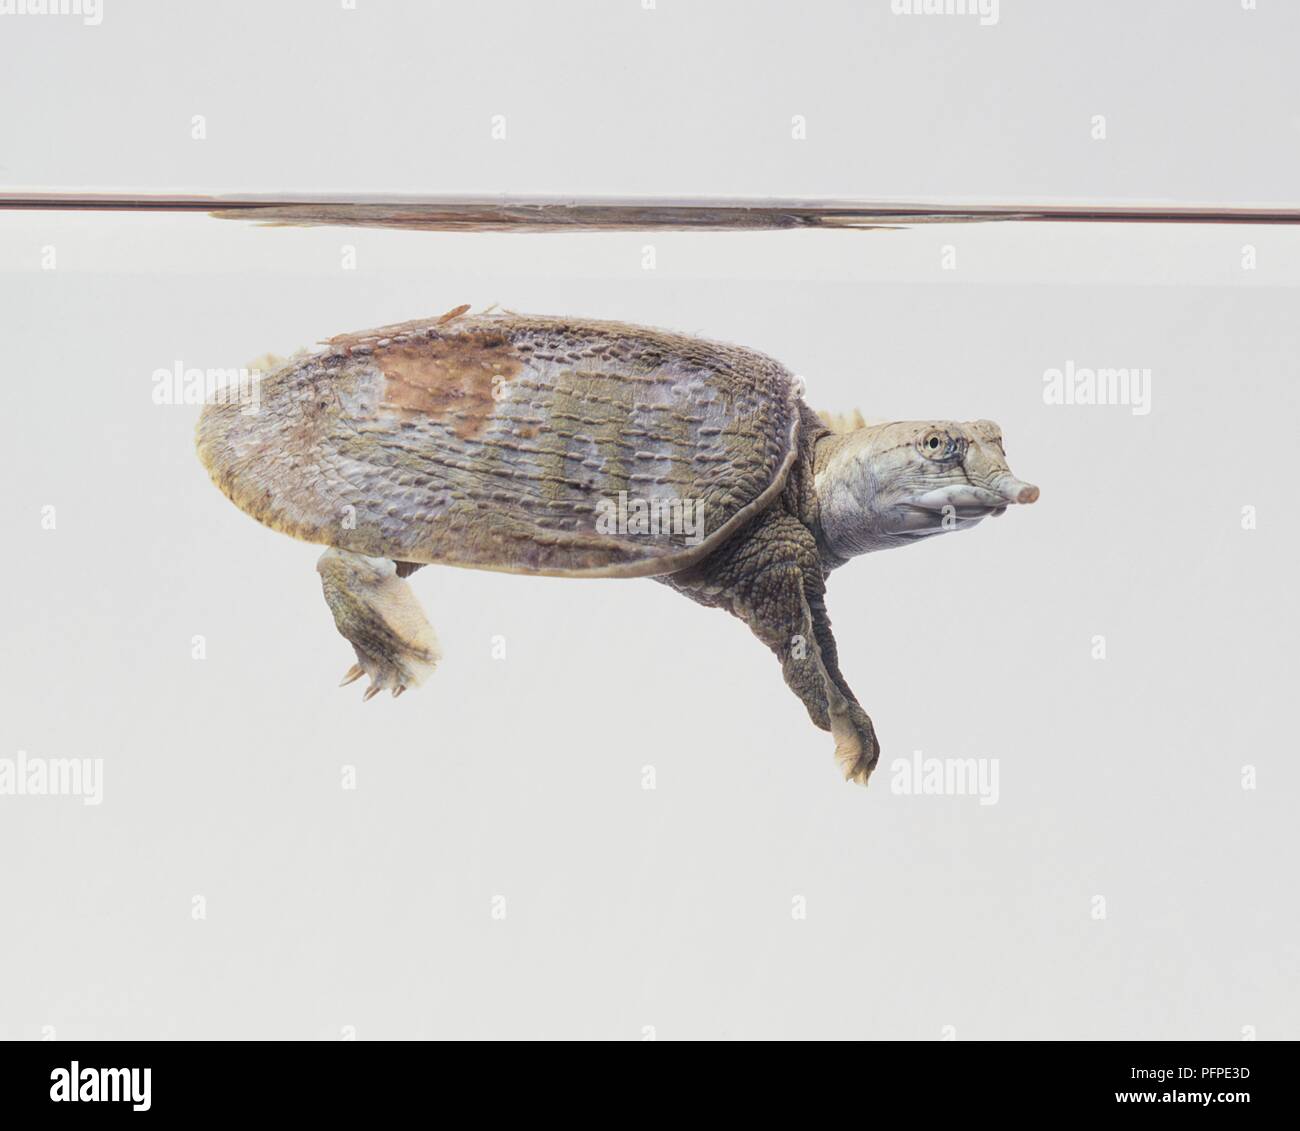 Soft-shelled turtle (Trionychidae) underwater, side view Stock Photo